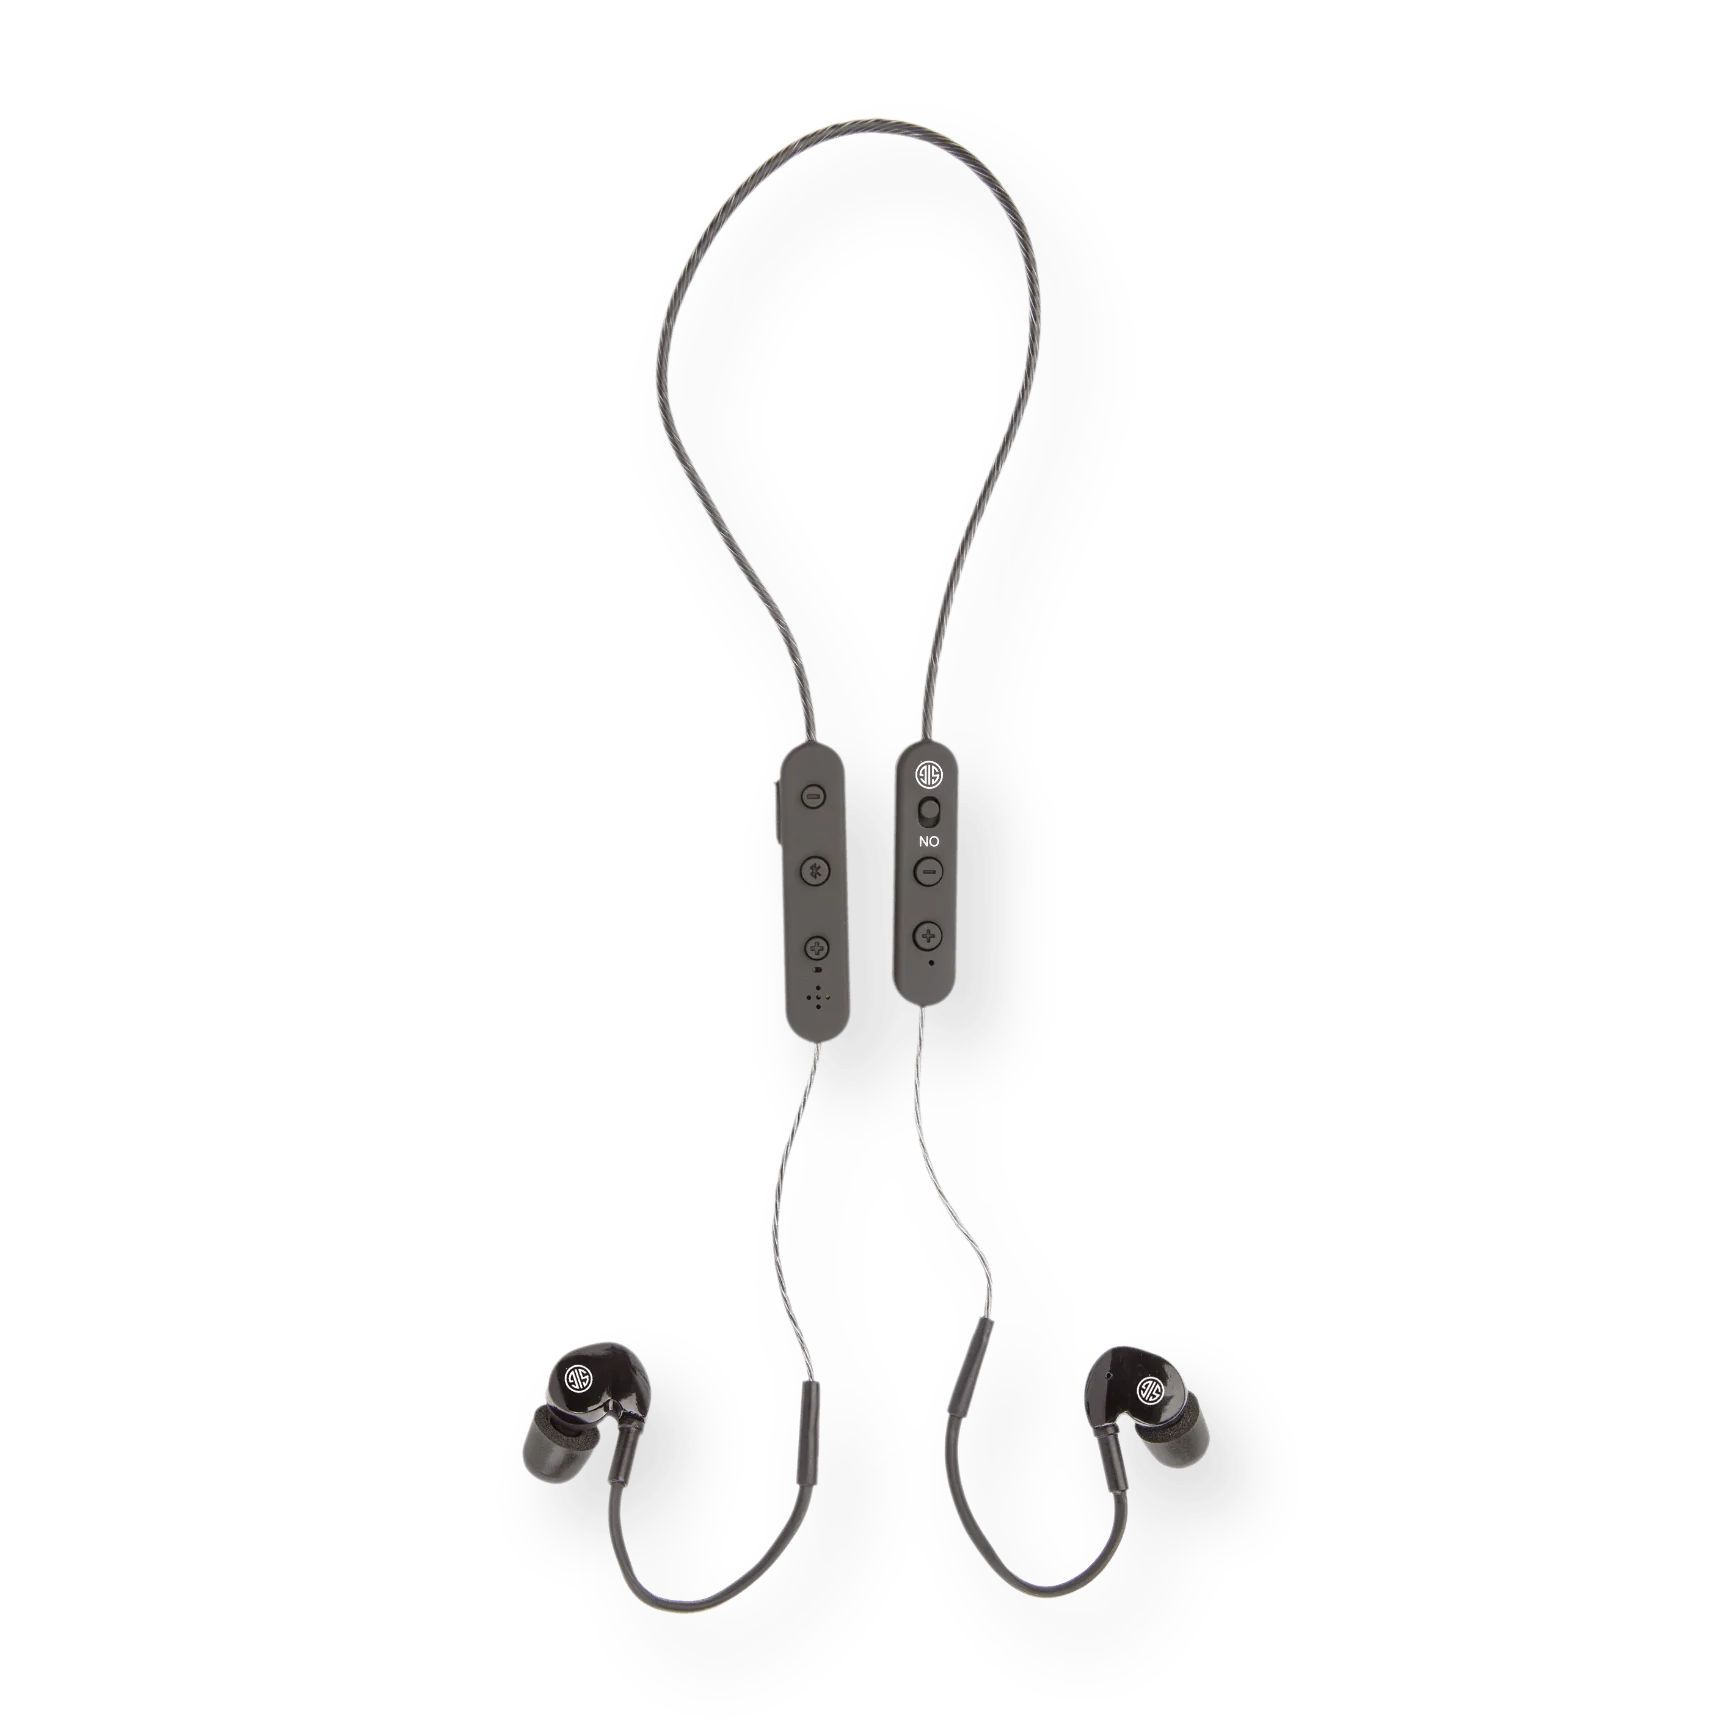 Axil SIG GS Extreme 2.0 Earbuds - Newest Arrivals